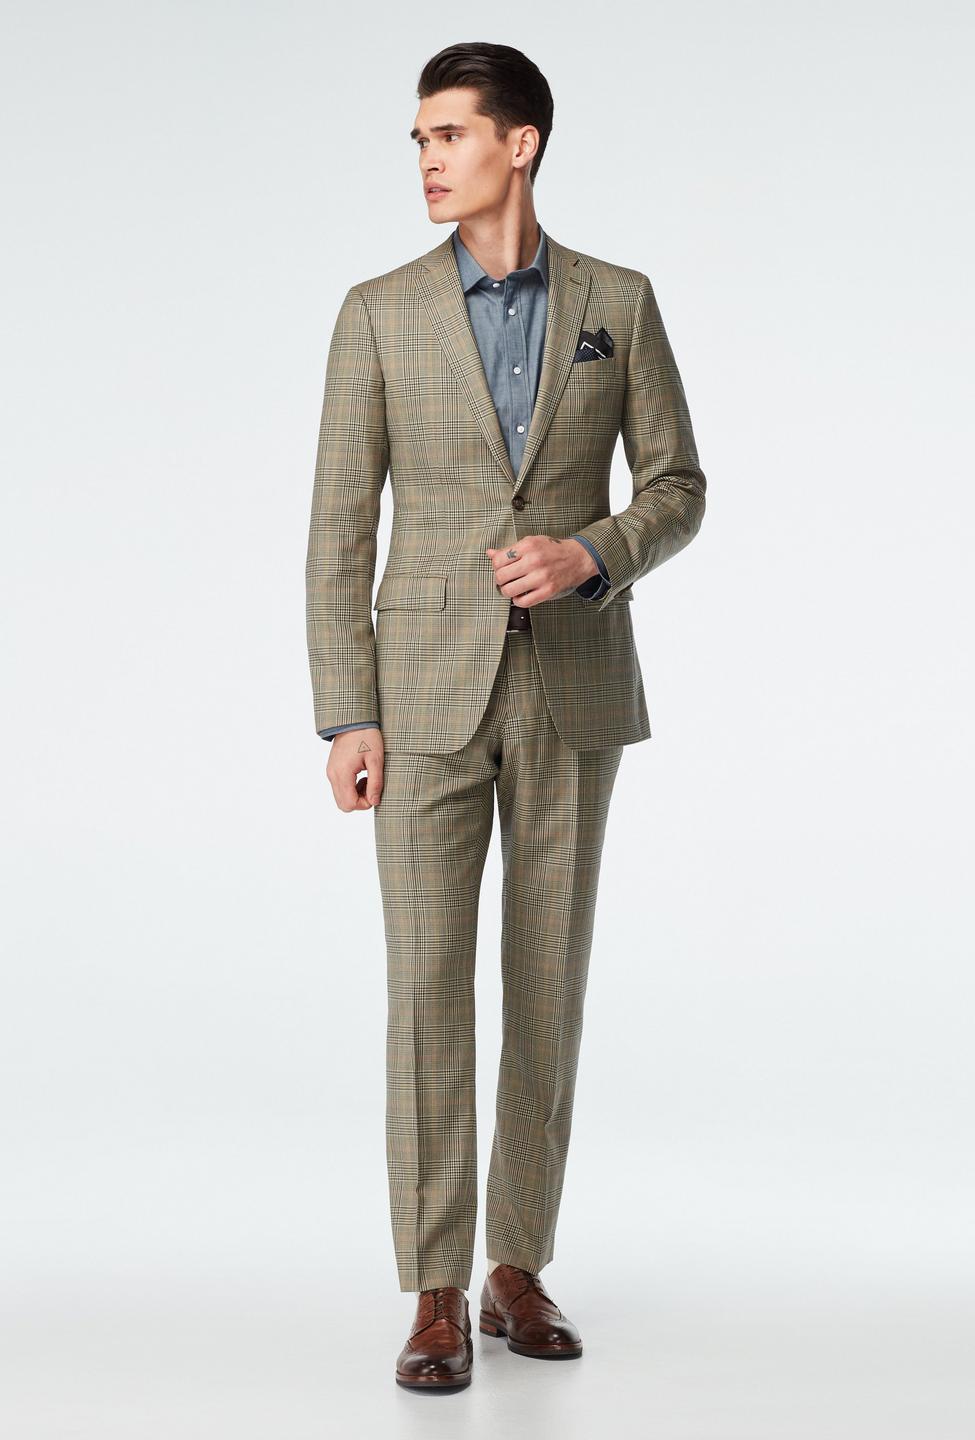 Brown suit - Sunderland Plaid Design from Seasonal Indochino Collection